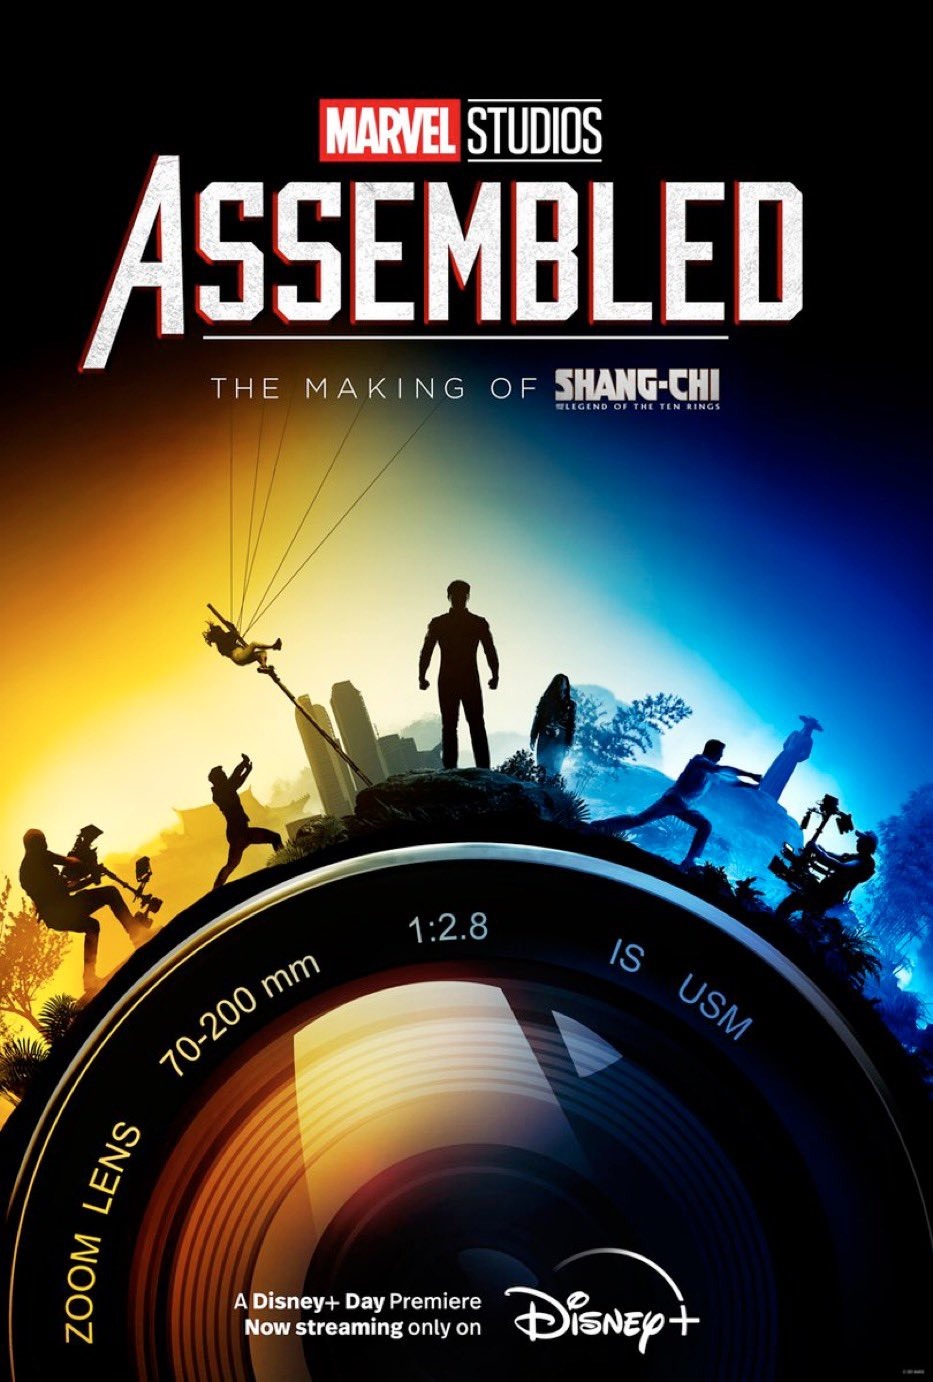 Extra Large TV Poster Image for Marvel Studios: Assembled (#6 of 20)